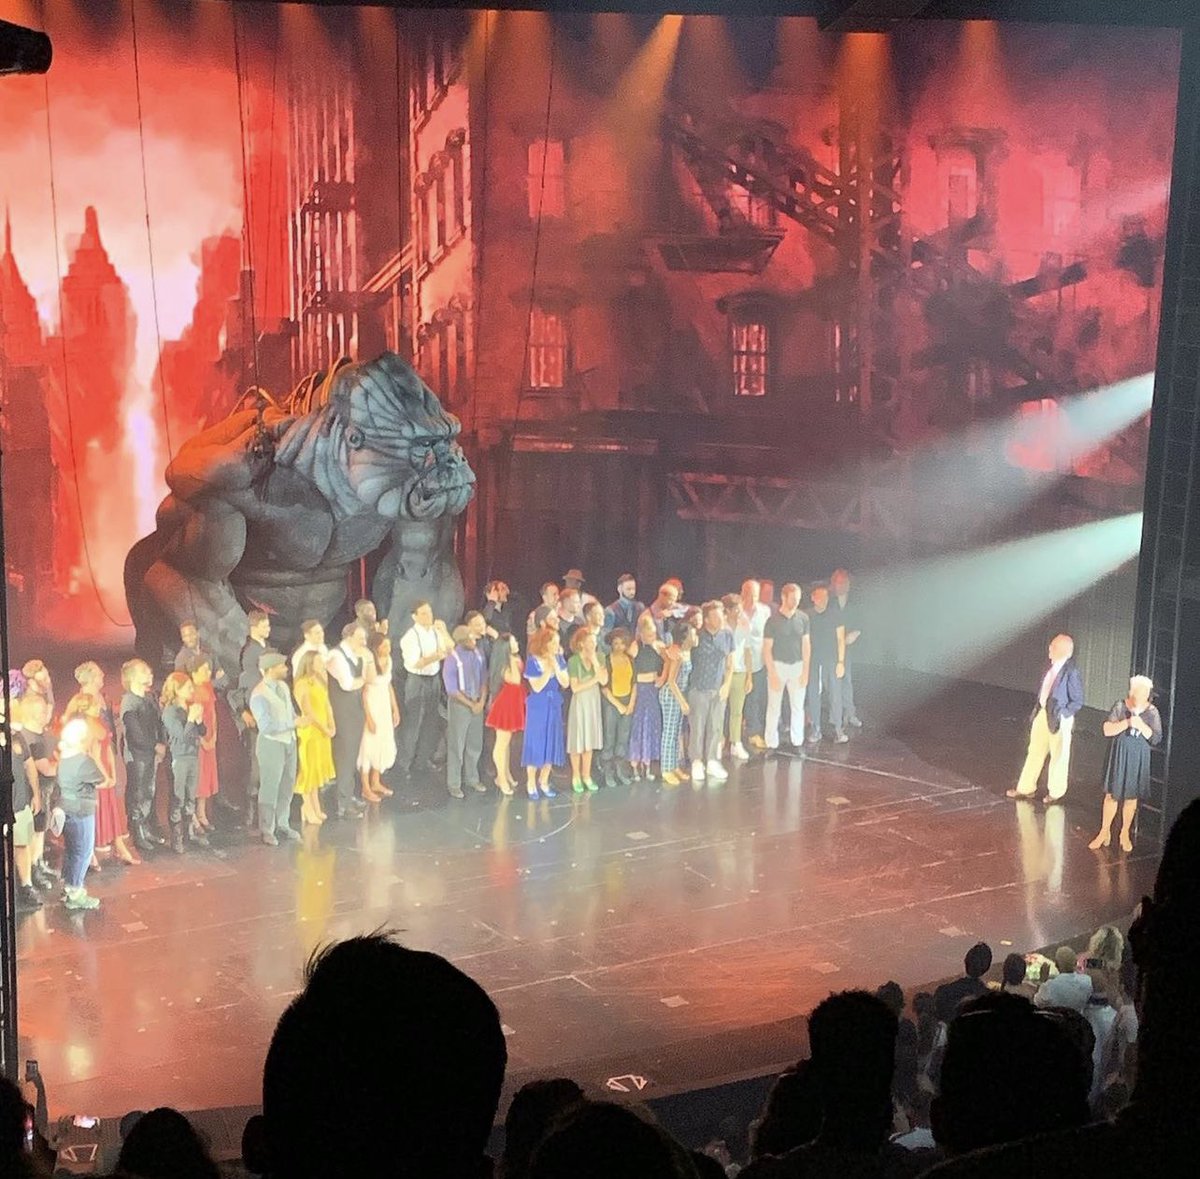 You may have been at the final performance of Kimberly Akimbo.. but I was at the final performance of the misunderstood King Kong.